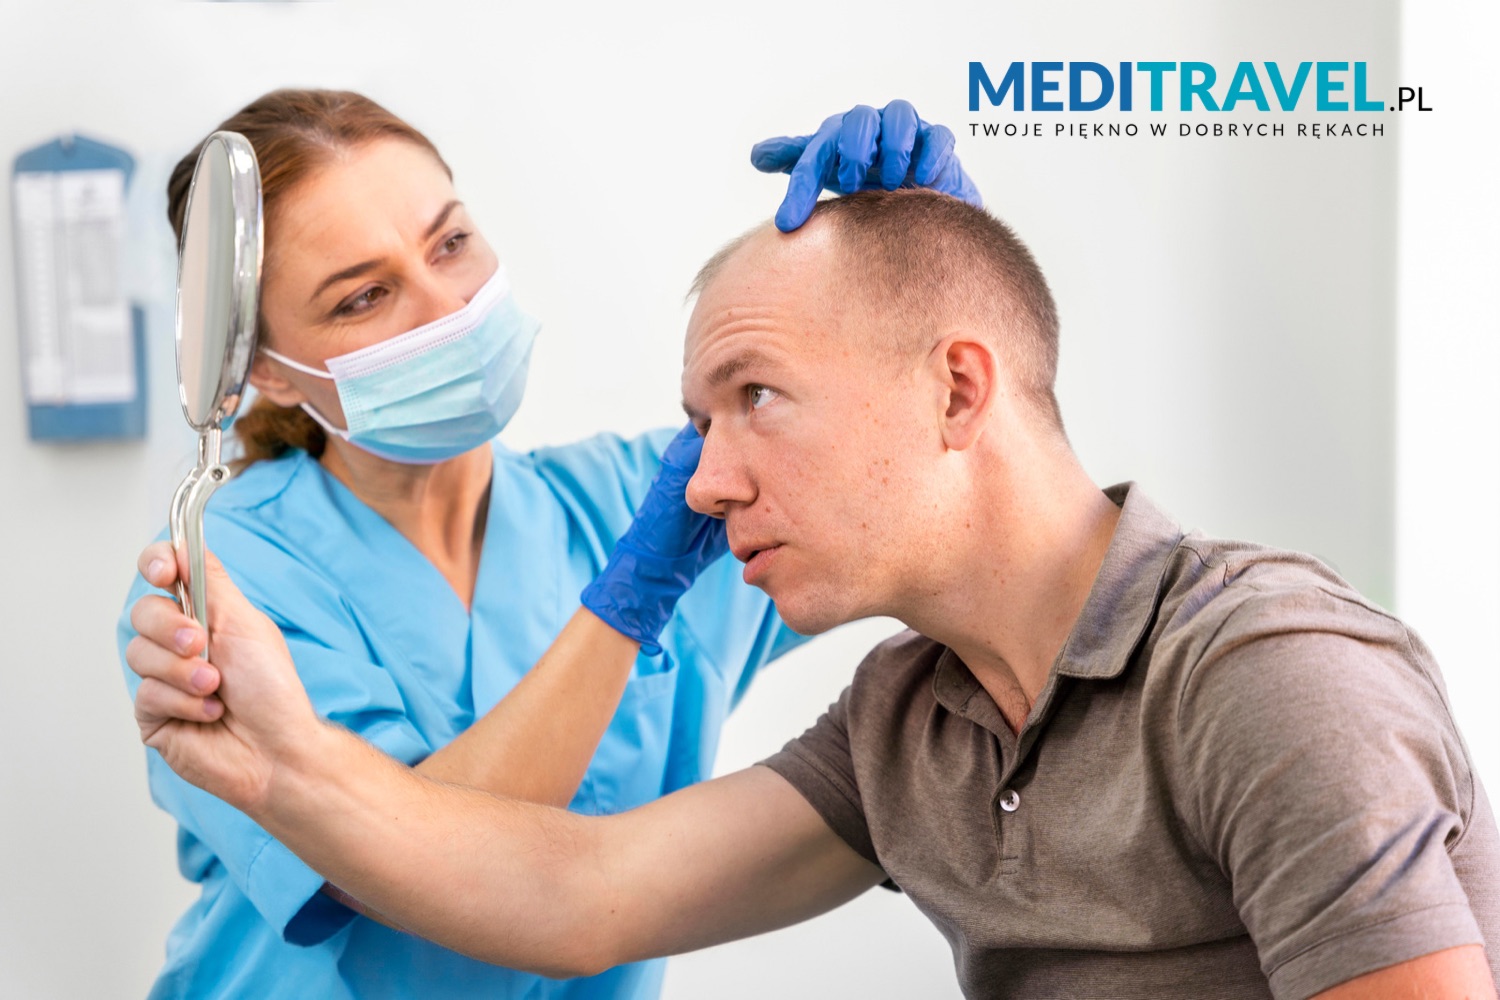 Can I practice after hair transplantation in Turkey